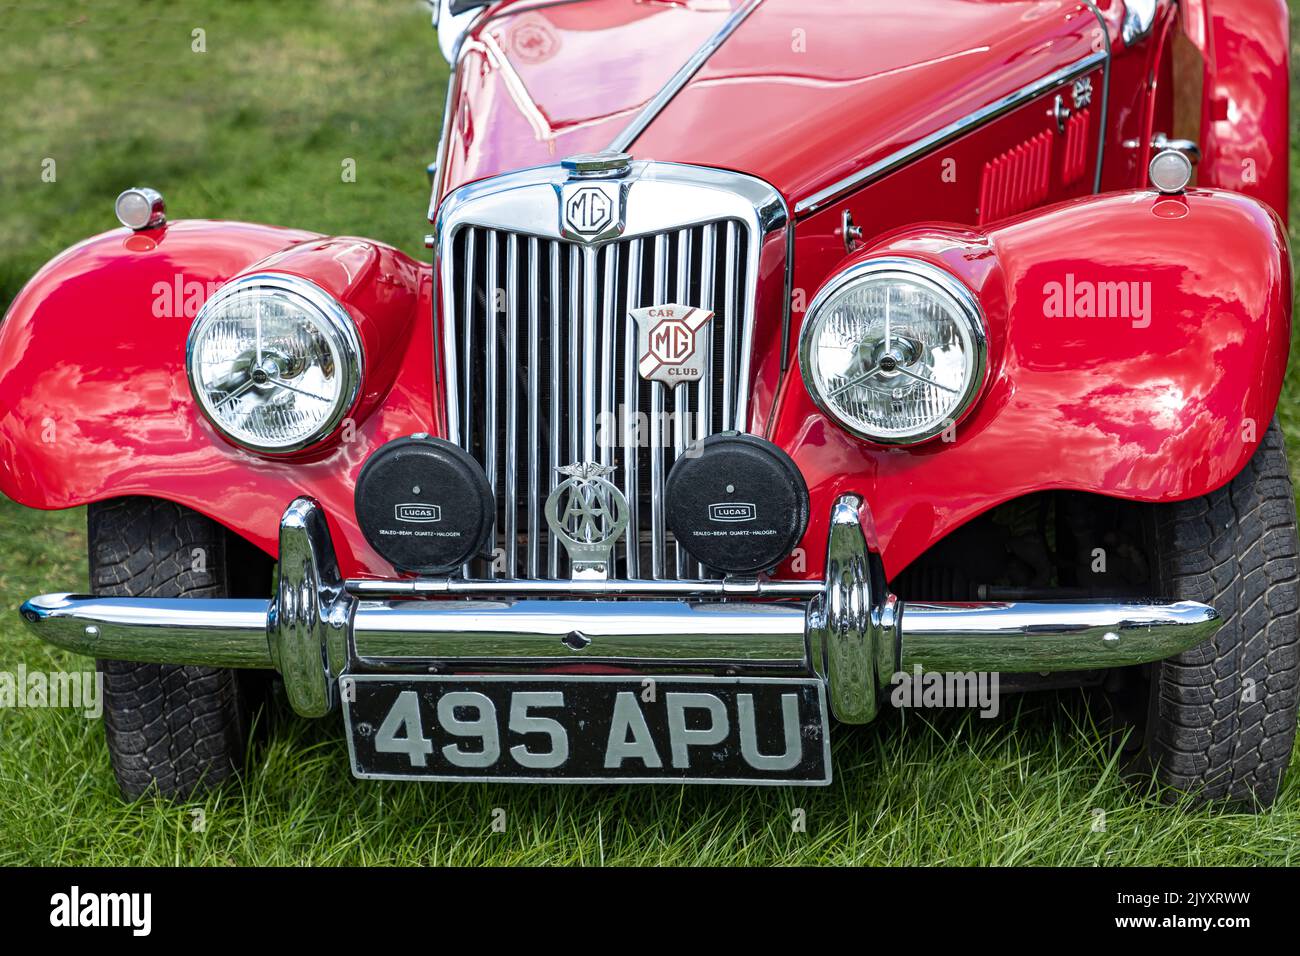 Bettley, Crewe, Cheshire, UK - August 6th, 2022 - front view of a red vintage MG car Stock Photo